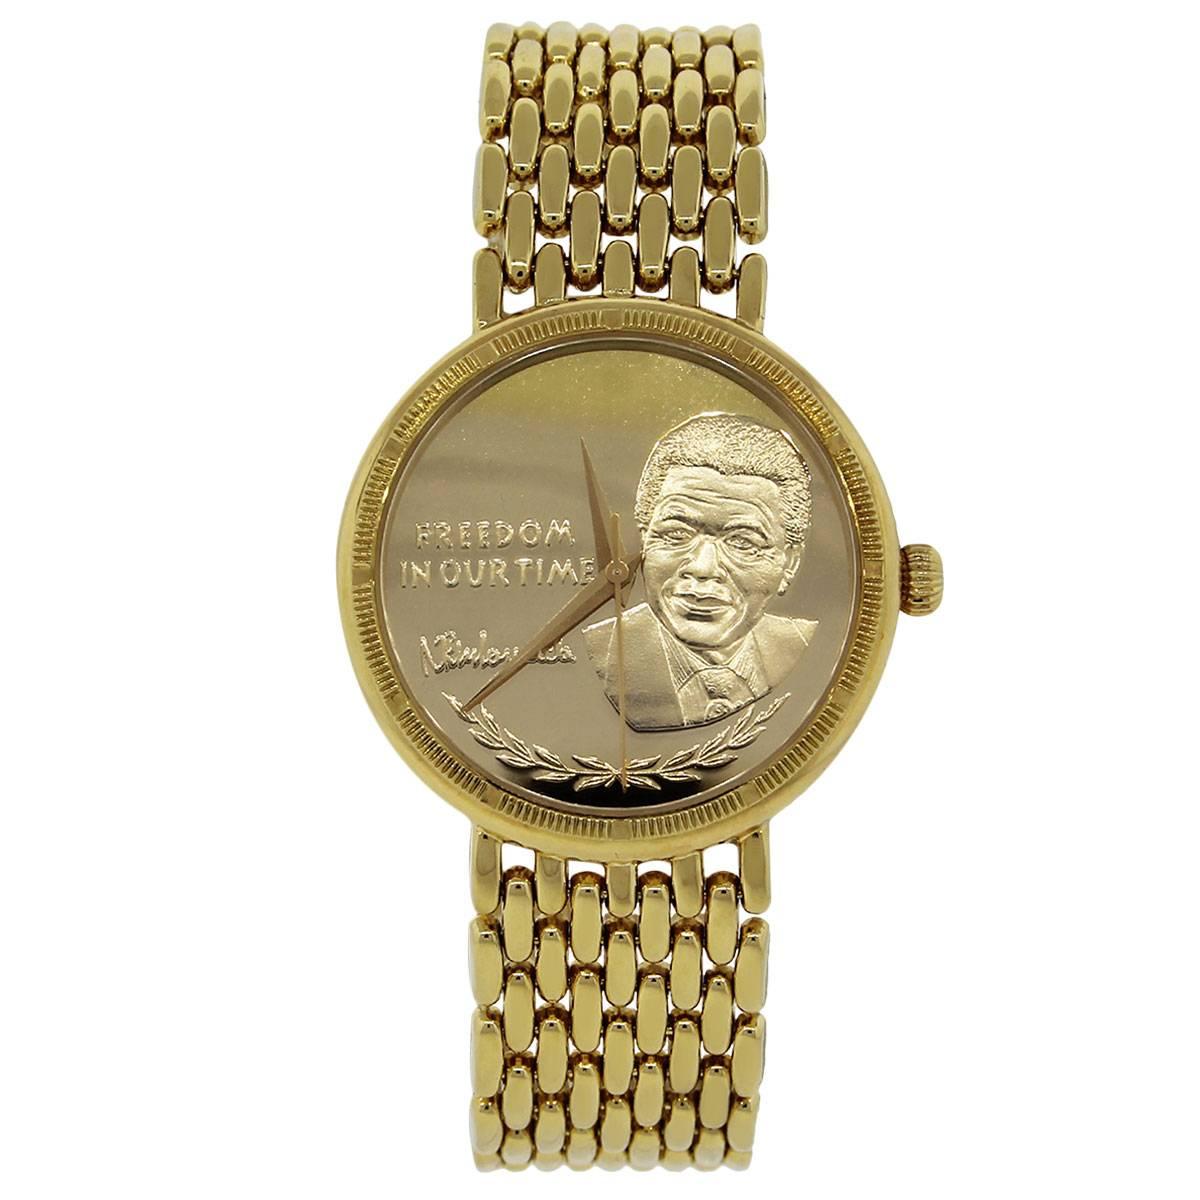 MPN: 177/2000
Style: Nelson Mandela yellow gold watch
Case Material: 18k yellow gold
Case Diameter: 34mm
Crystal: Sapphire
Bezel: 18k yellow gold
Dial: Image of Nelson Mandela in 18k yellow gold 